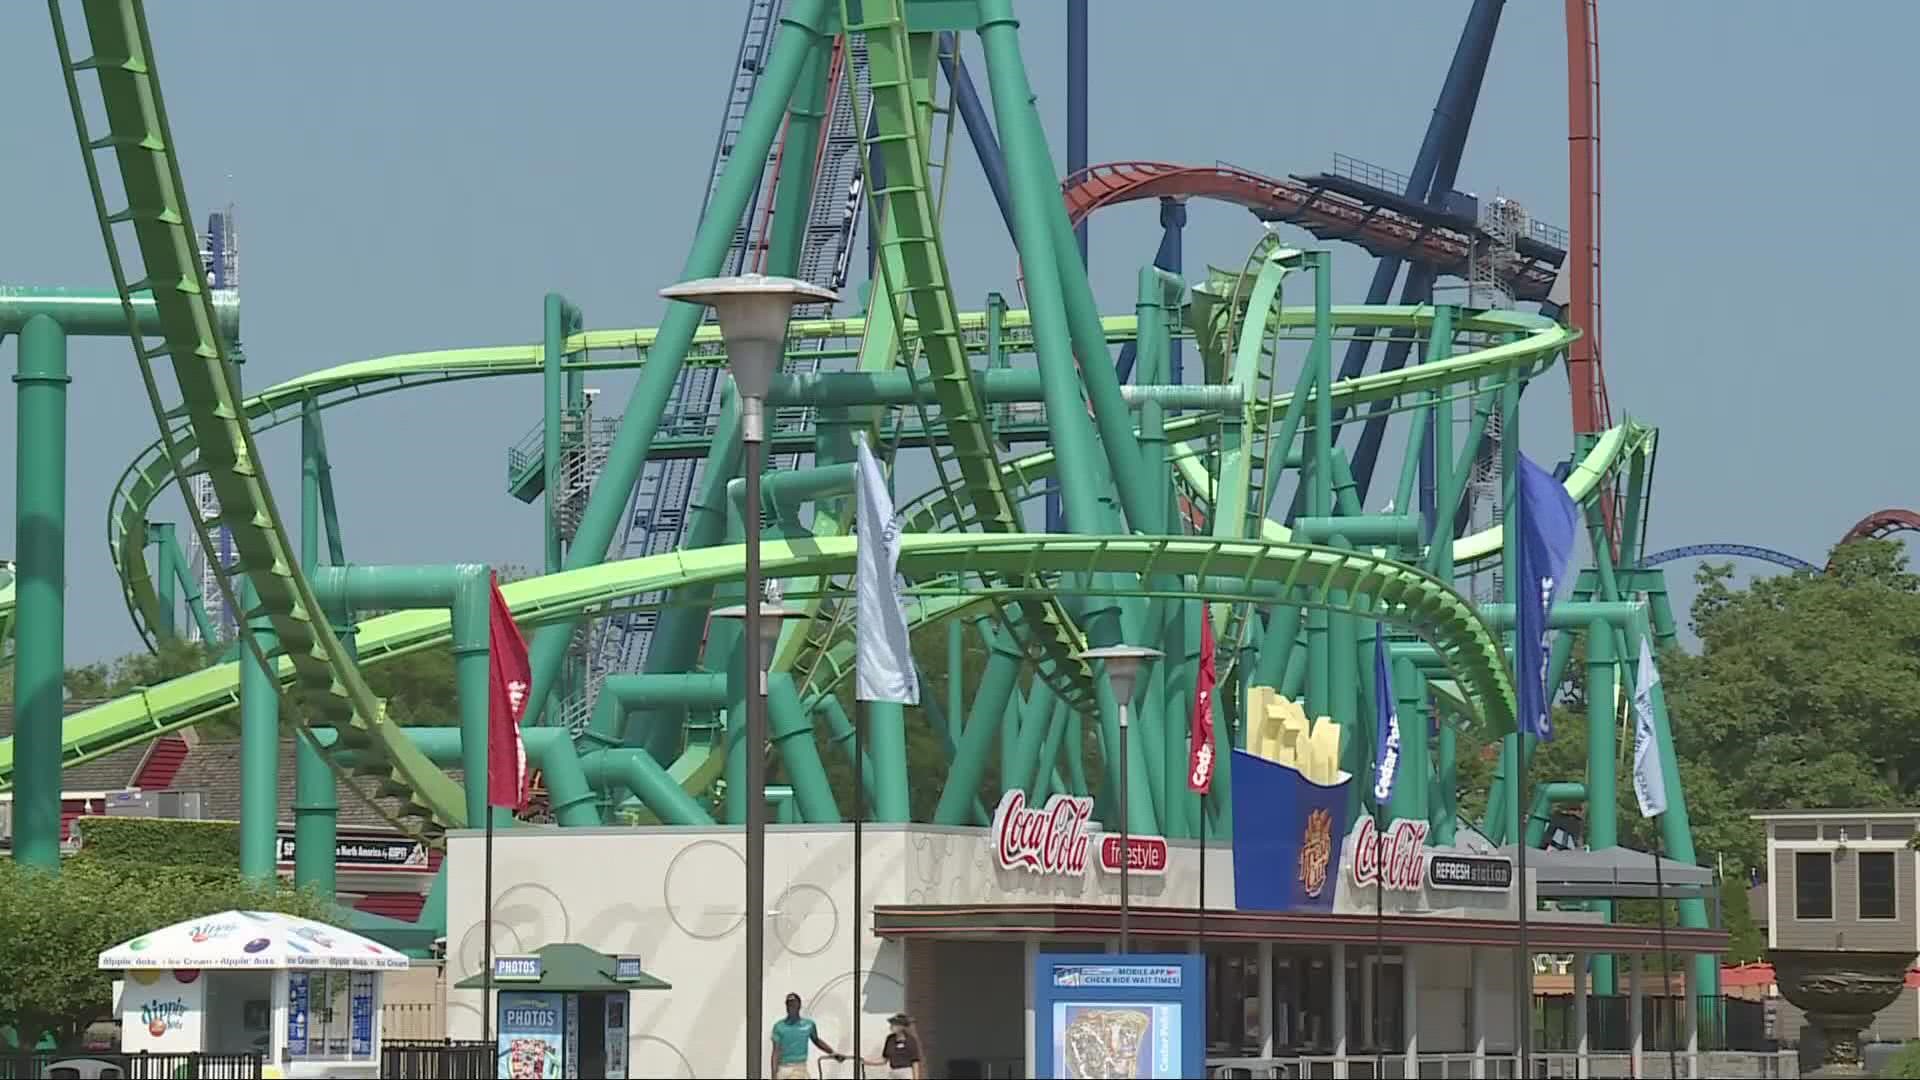 Cedar Point is consistently ranked among the best amusement parks in the country.